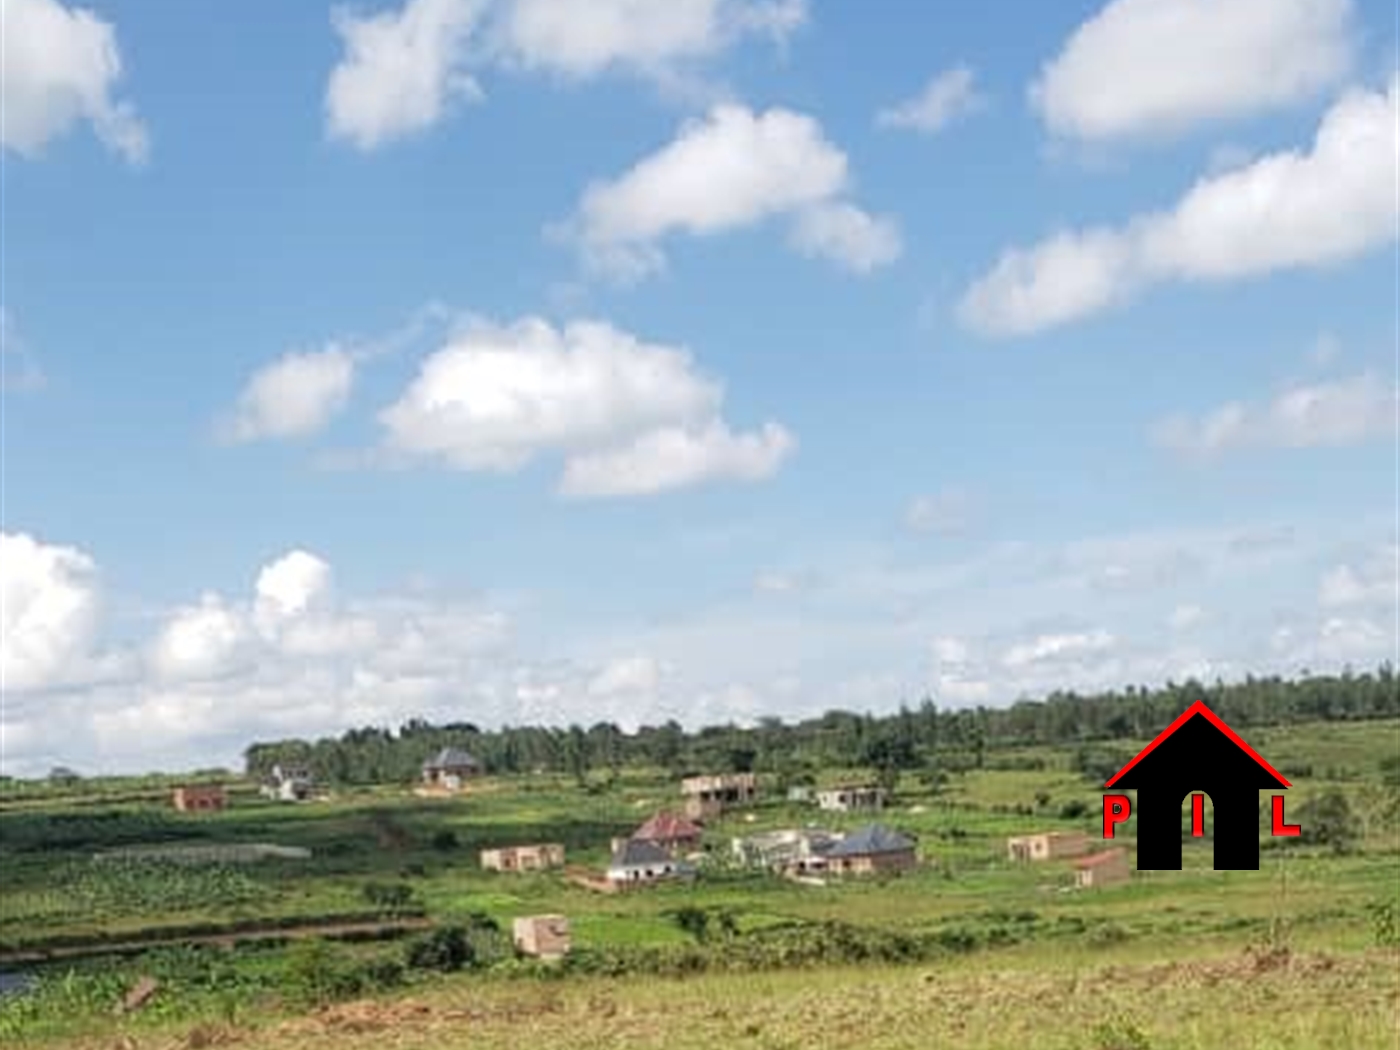 Commercial Land for sale in Kashenyi Mbarara